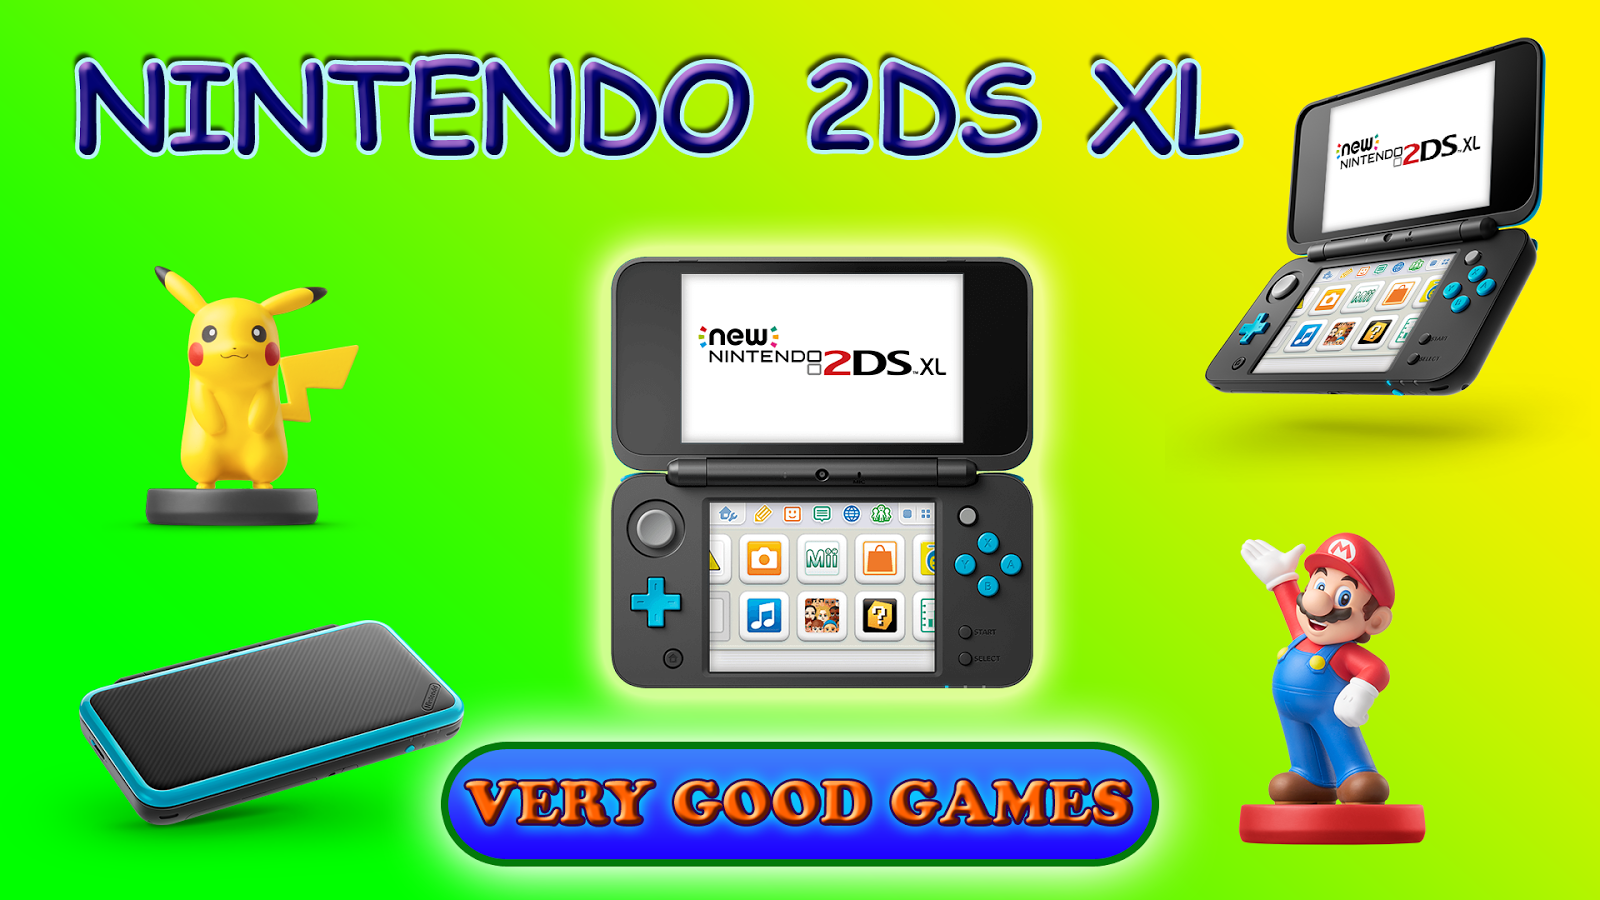 News about announcing on Nintendo 2DS XL